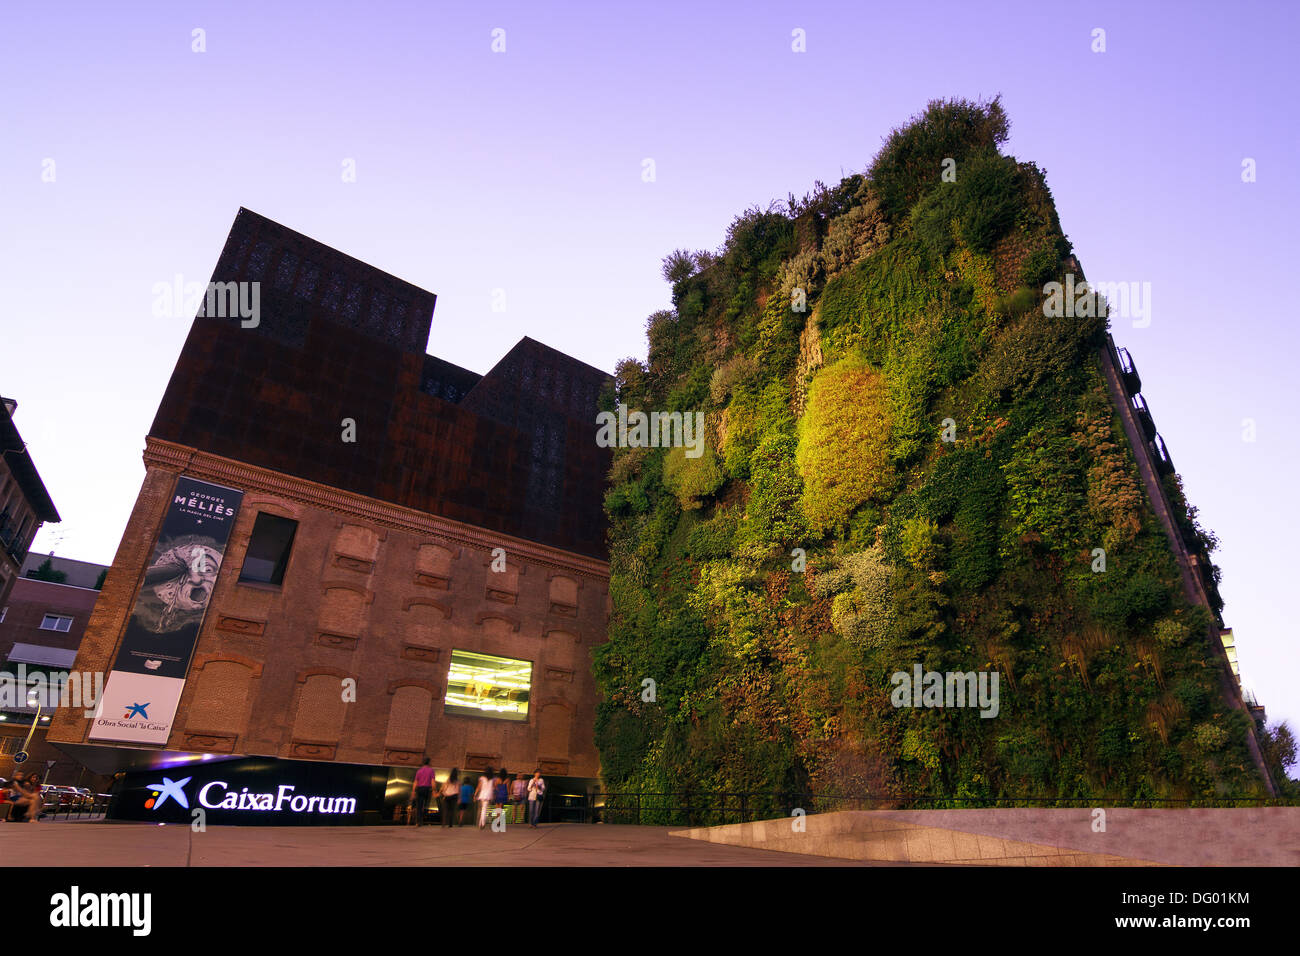 Caixa Forum Madrid is a museum and cultural center. It is sponsored by La Caixa. Facade of plants by botanist Patrick Blanc Stock Photo